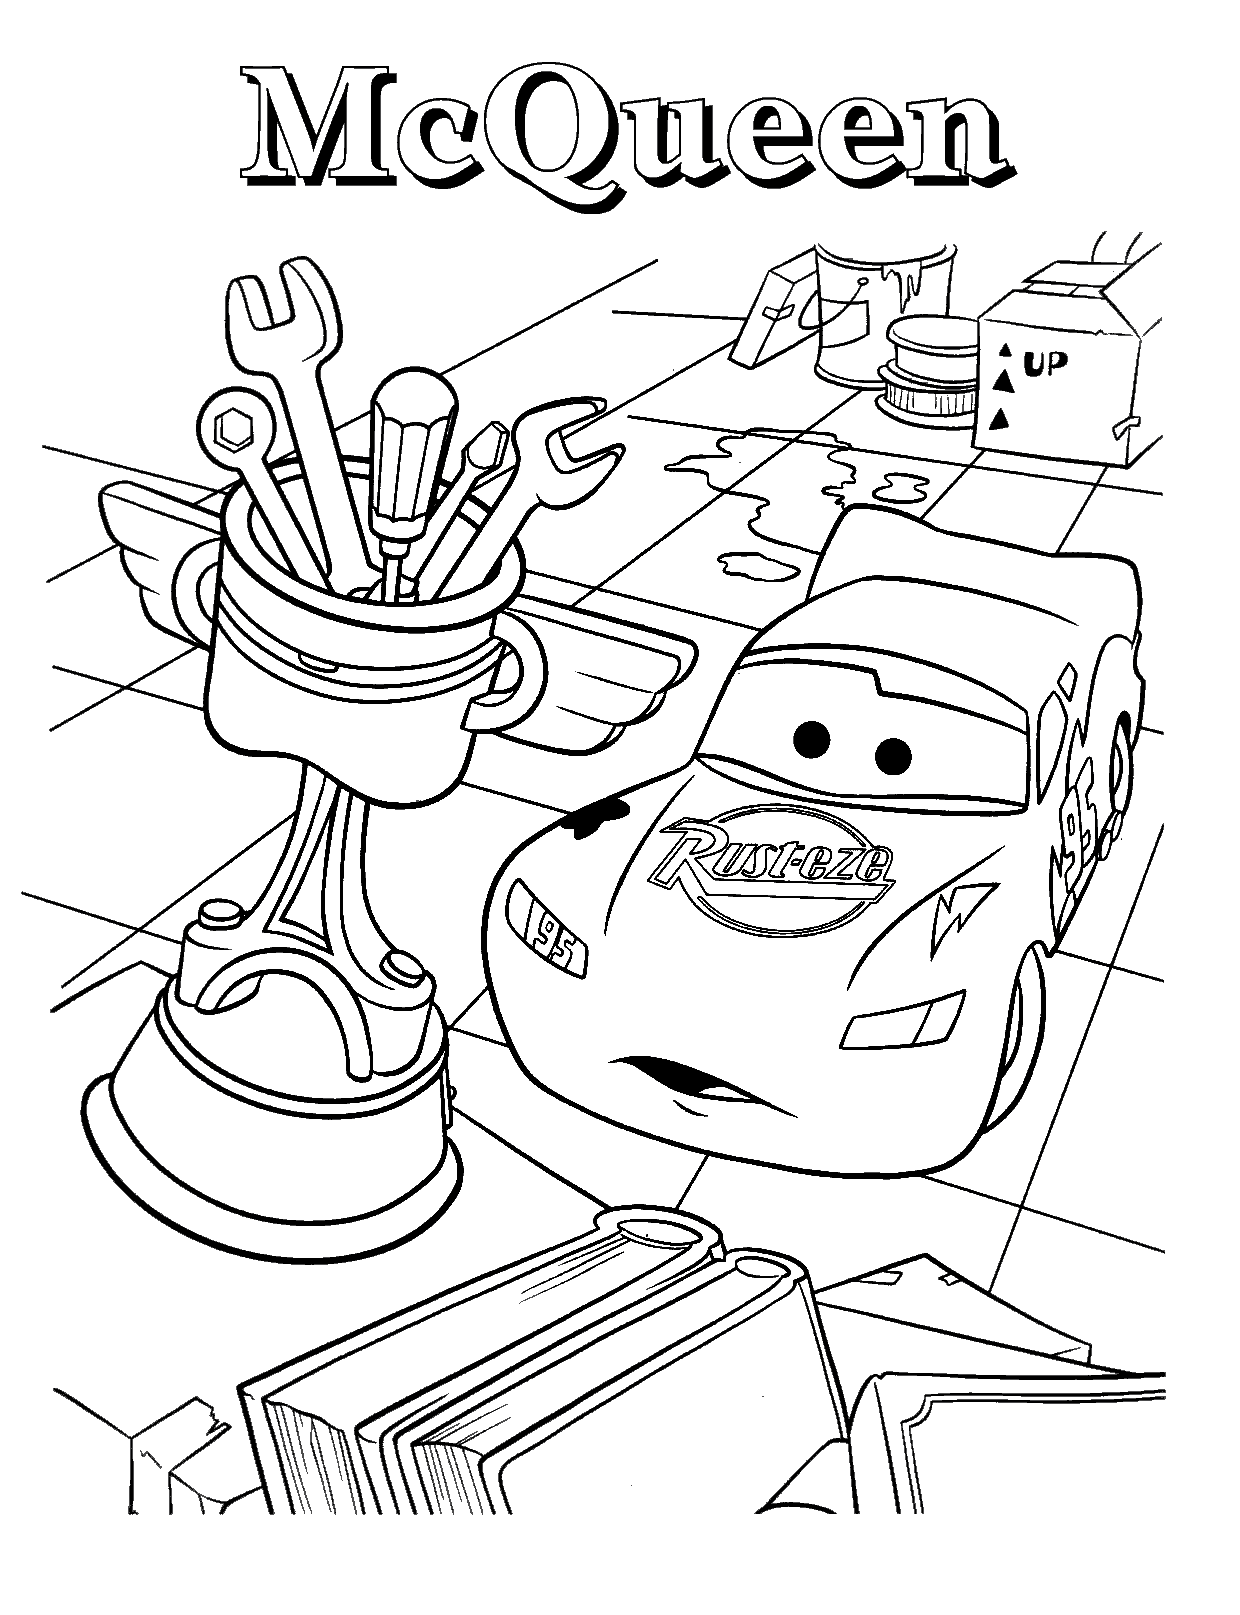 Lightning McQueen Coloring Pages TV Film print free Printable 2020 04439 Coloring4free